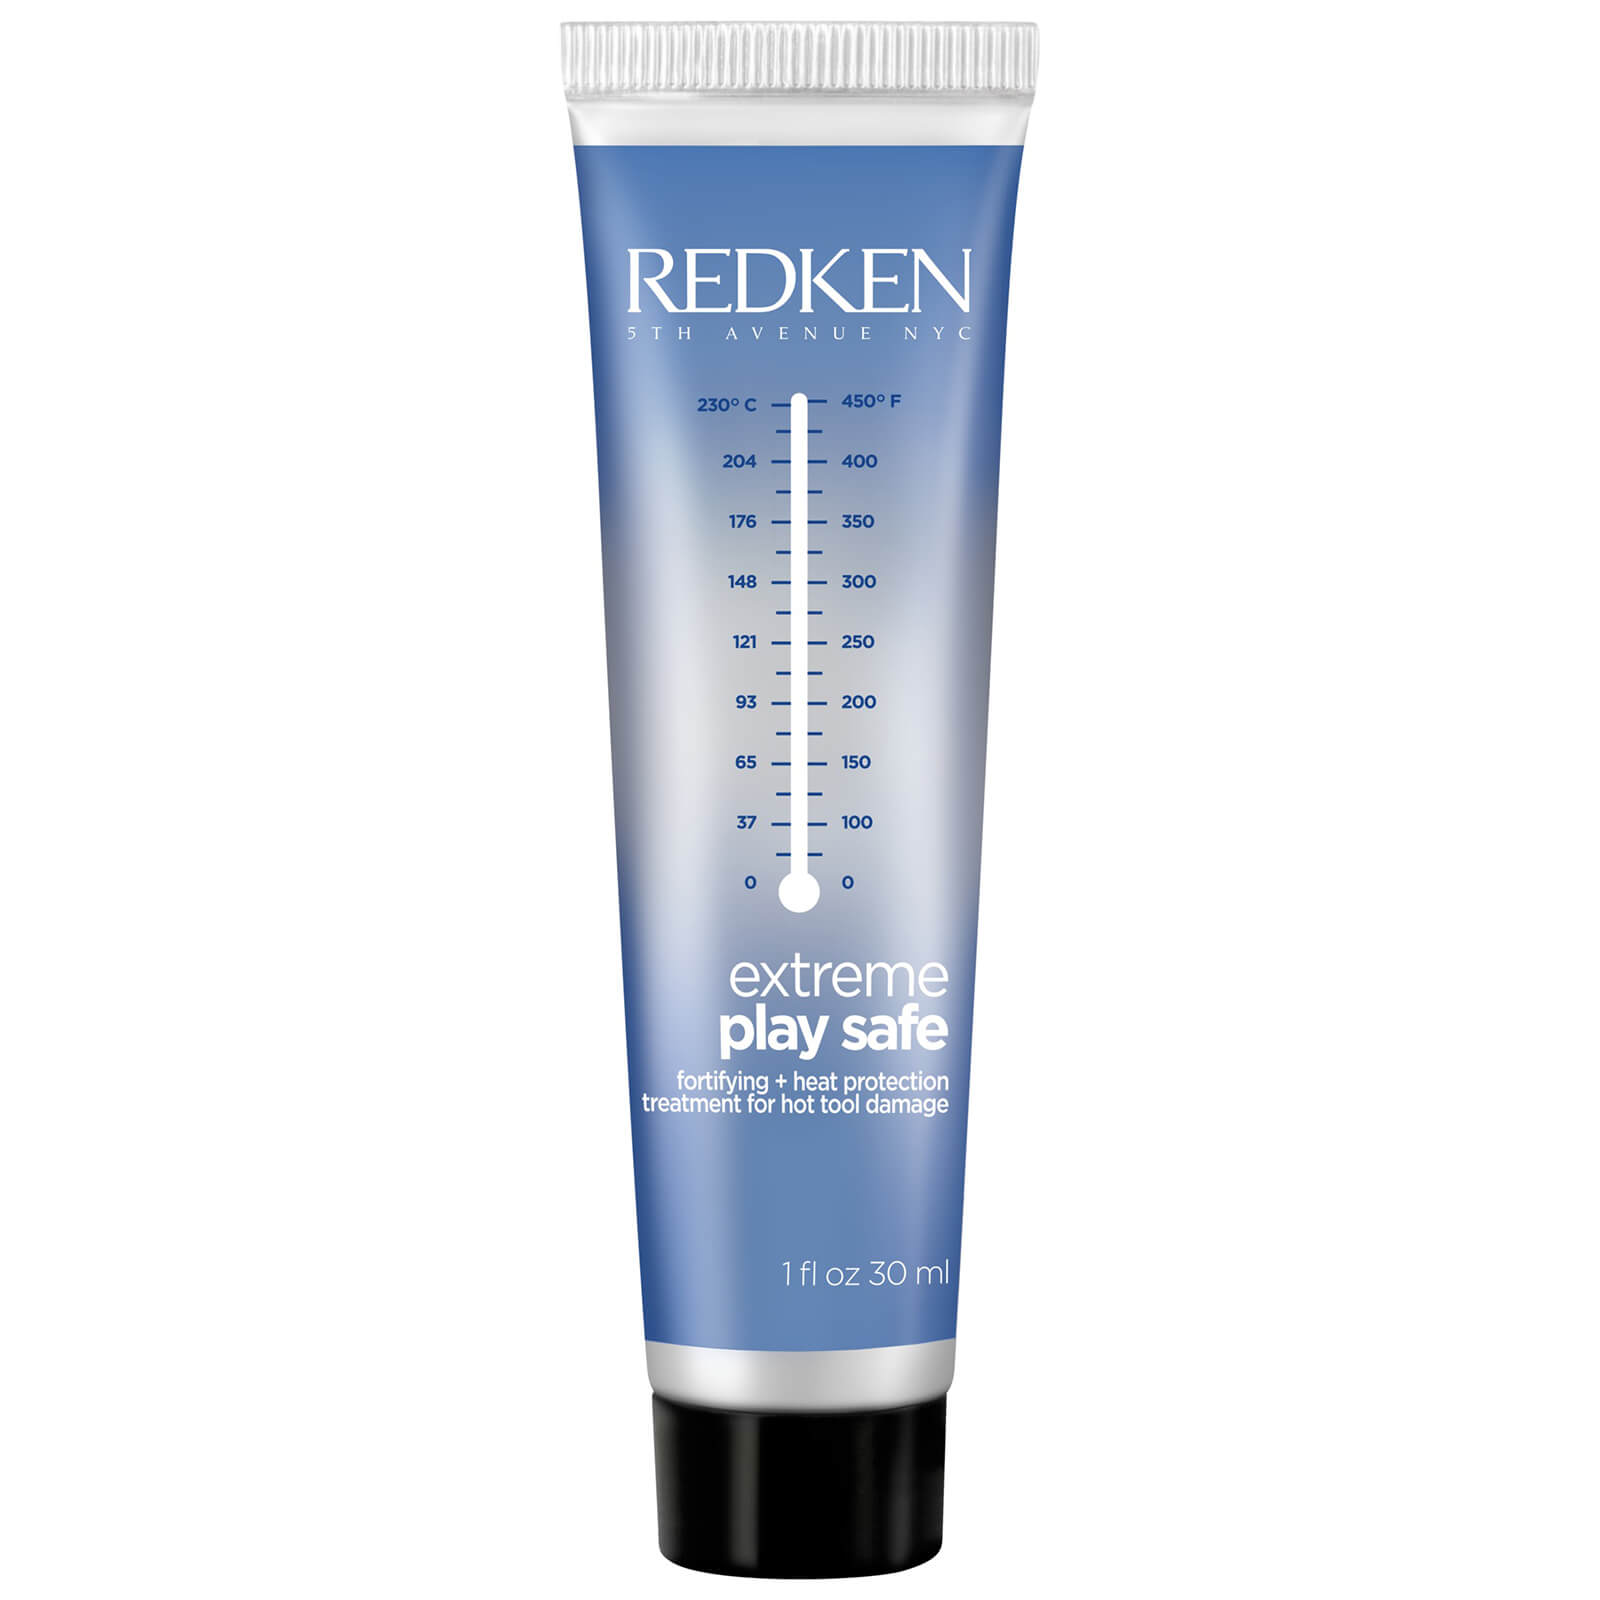 Redken Extreme Play Safe Leave In Treatment 30ml